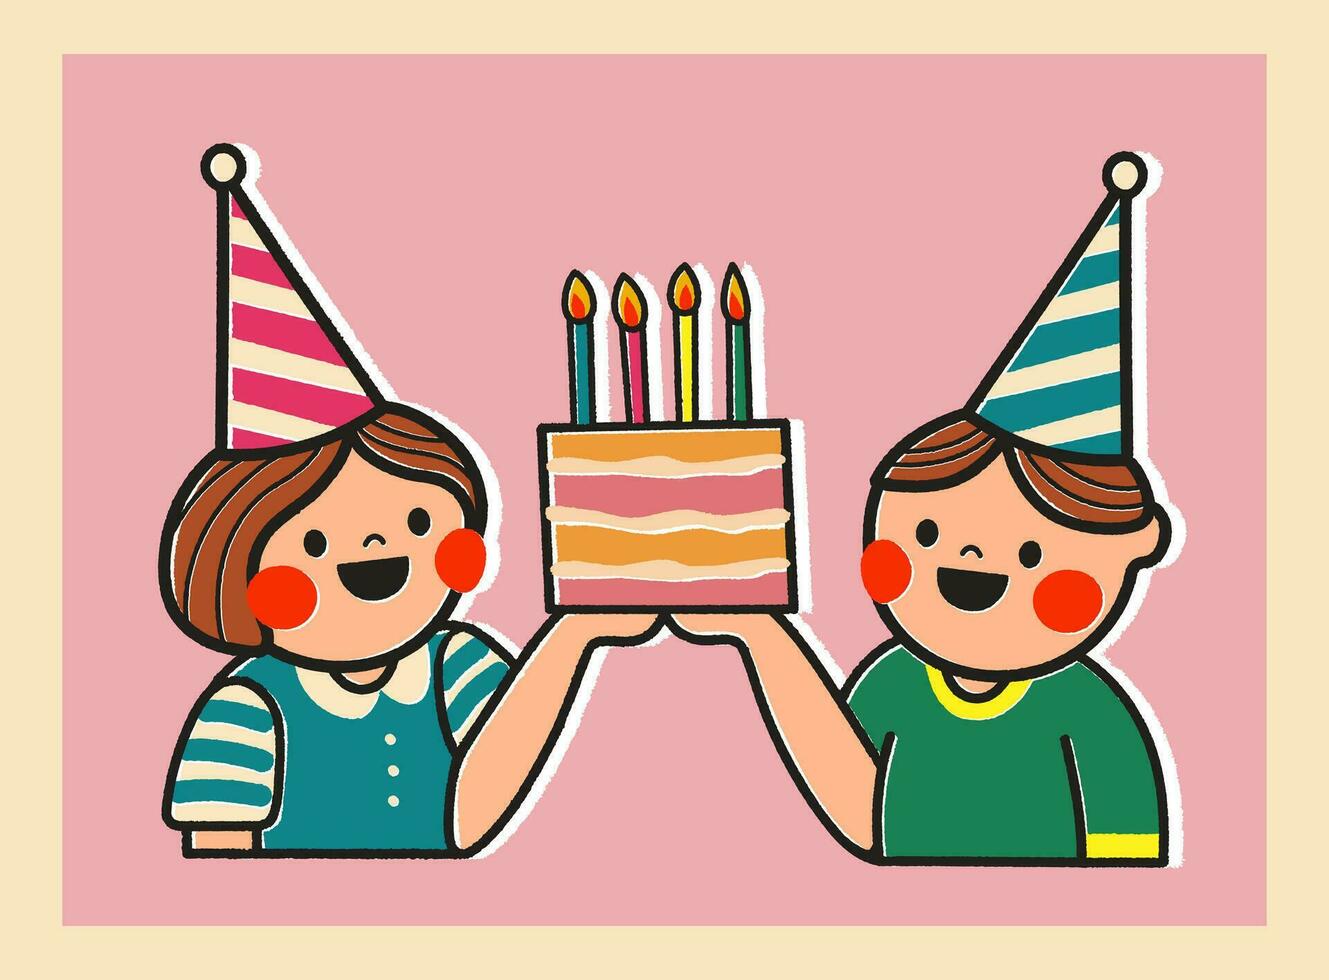 Birthday card with cartoon girl and boy holding a cake illustration on pink background. Sticker style greeting card in retro style. Cute postcard for child or design for your brand. vector